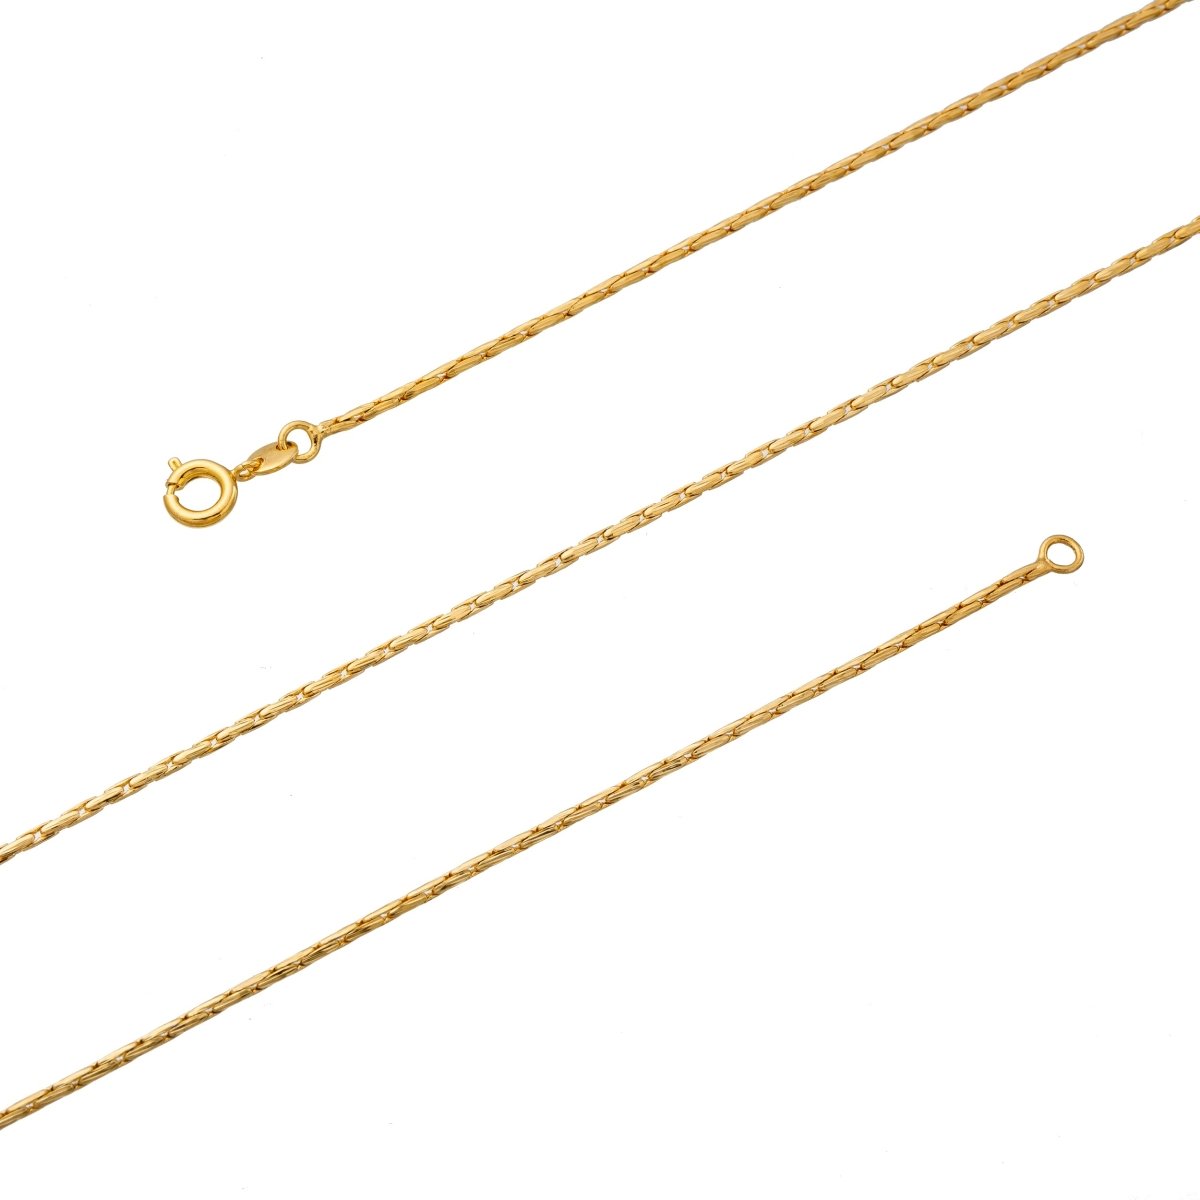 23.5 inch Boston Chain Necklace, 24K Gold Plated Finished Designed Chain Necklace, Dainty 0.8mm Designed Necklace w/ Spring Ring | CN-287 Clearance Pricing - DLUXCA